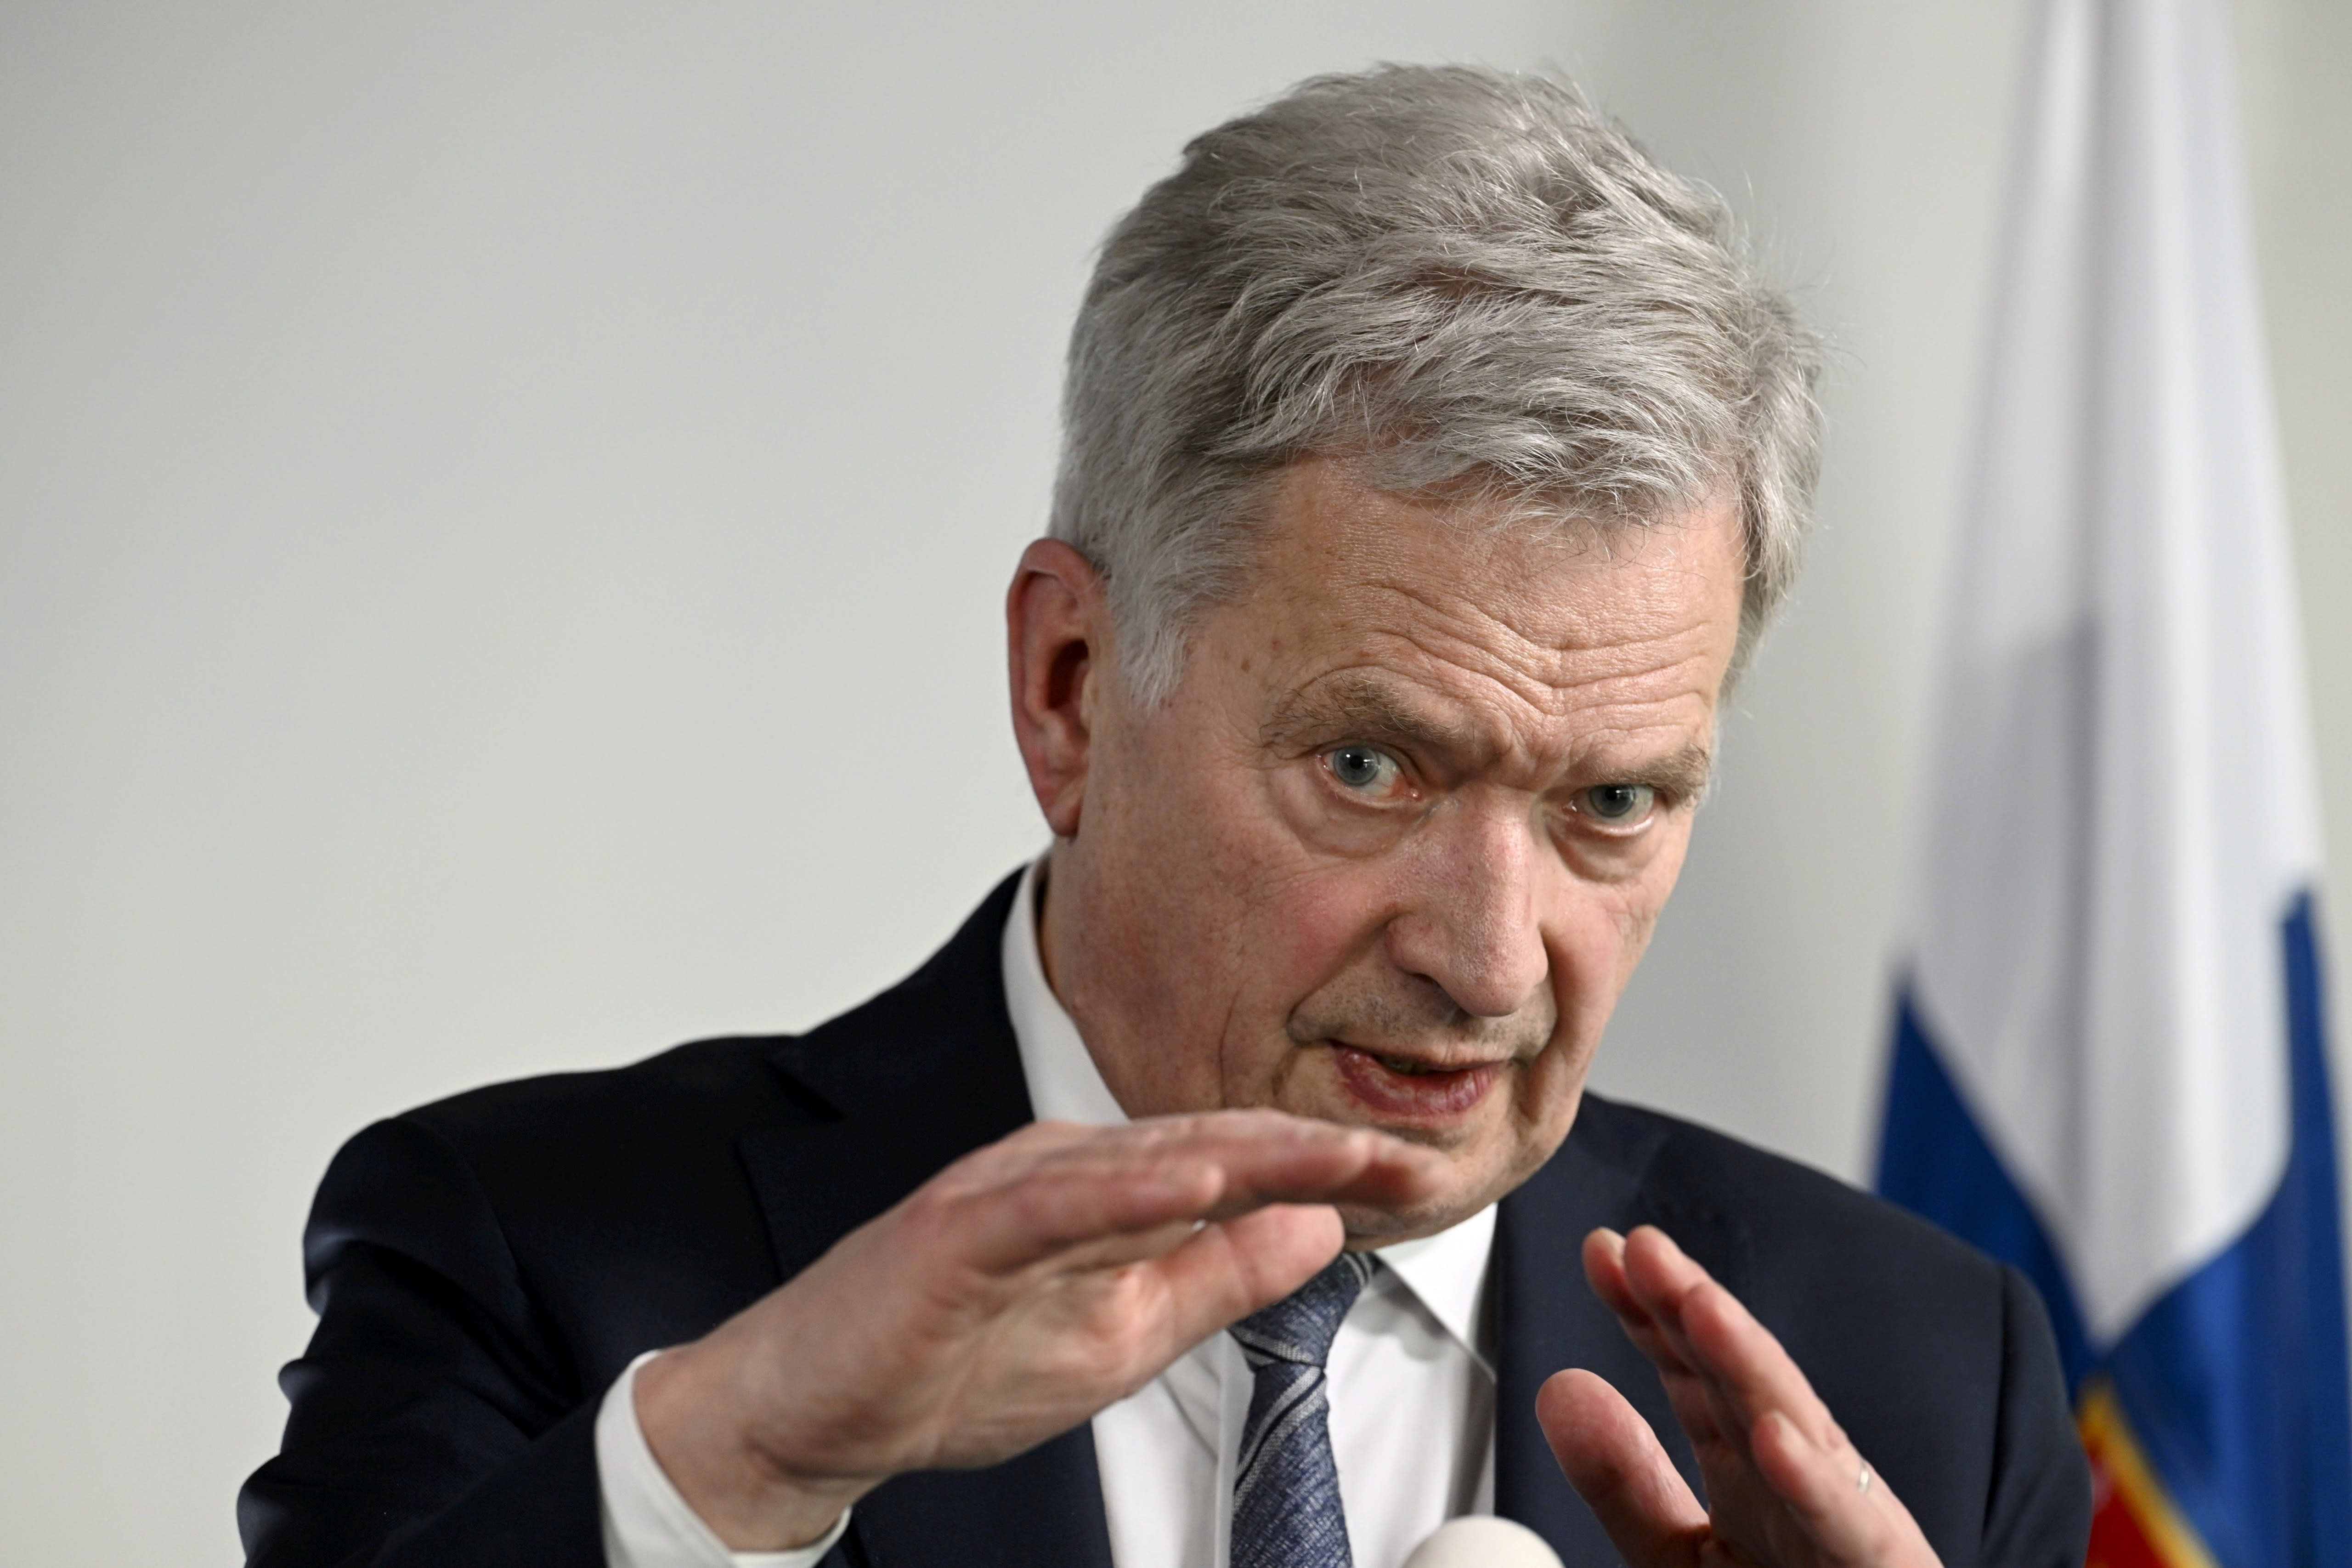 Finland may join NATO before Sweden, says Niinistö